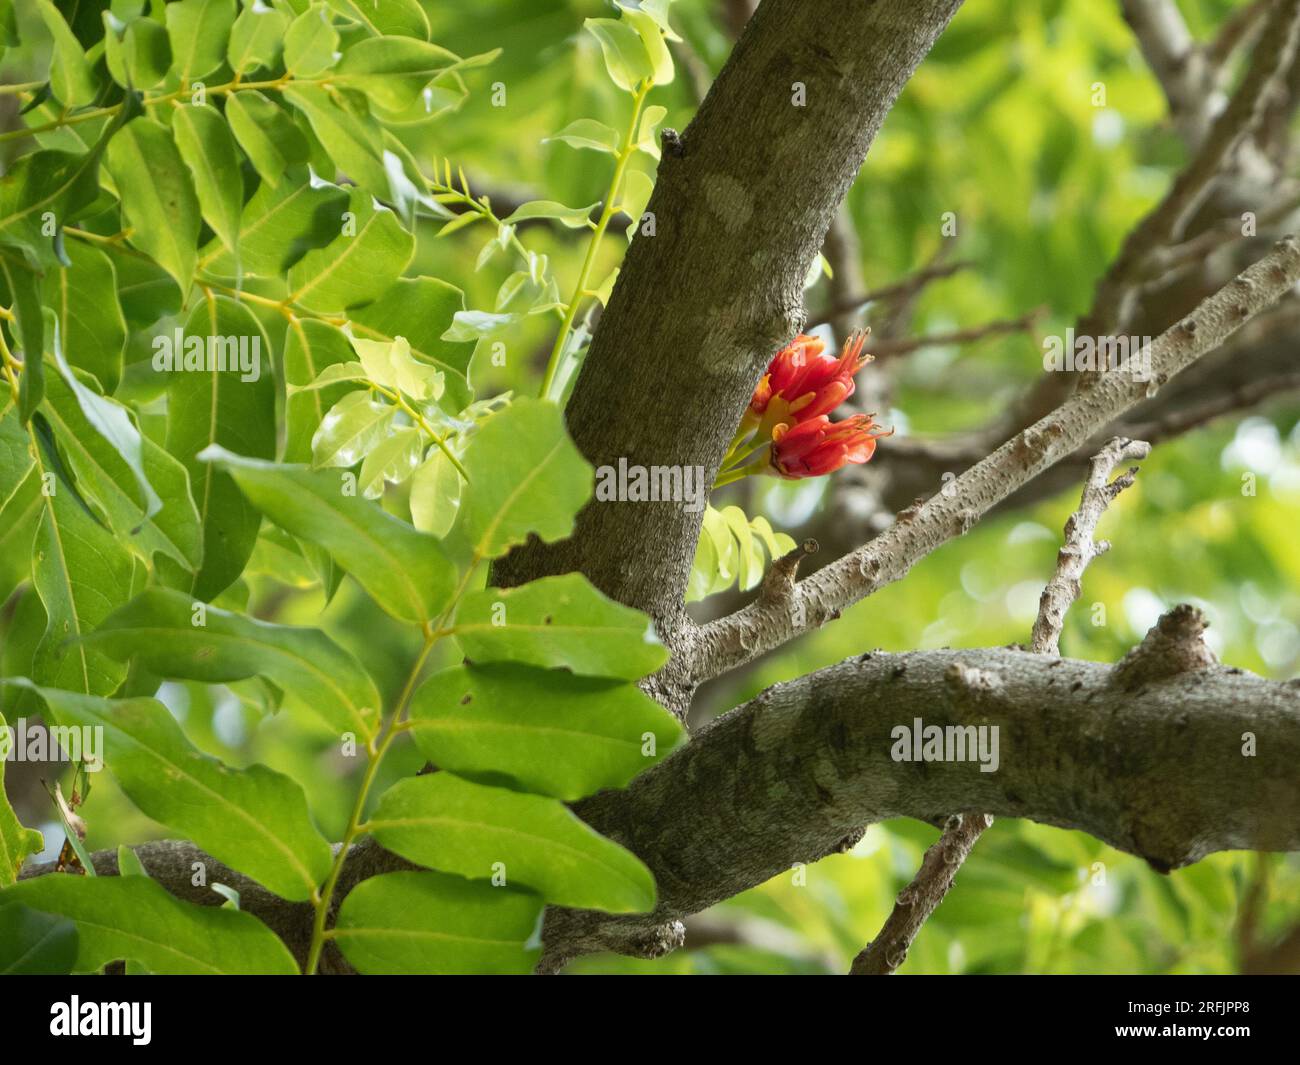 Castanospermum australe , Black Bean Tree or Moreton Bay Chestnut with red flowers and green leaves Stock Photo